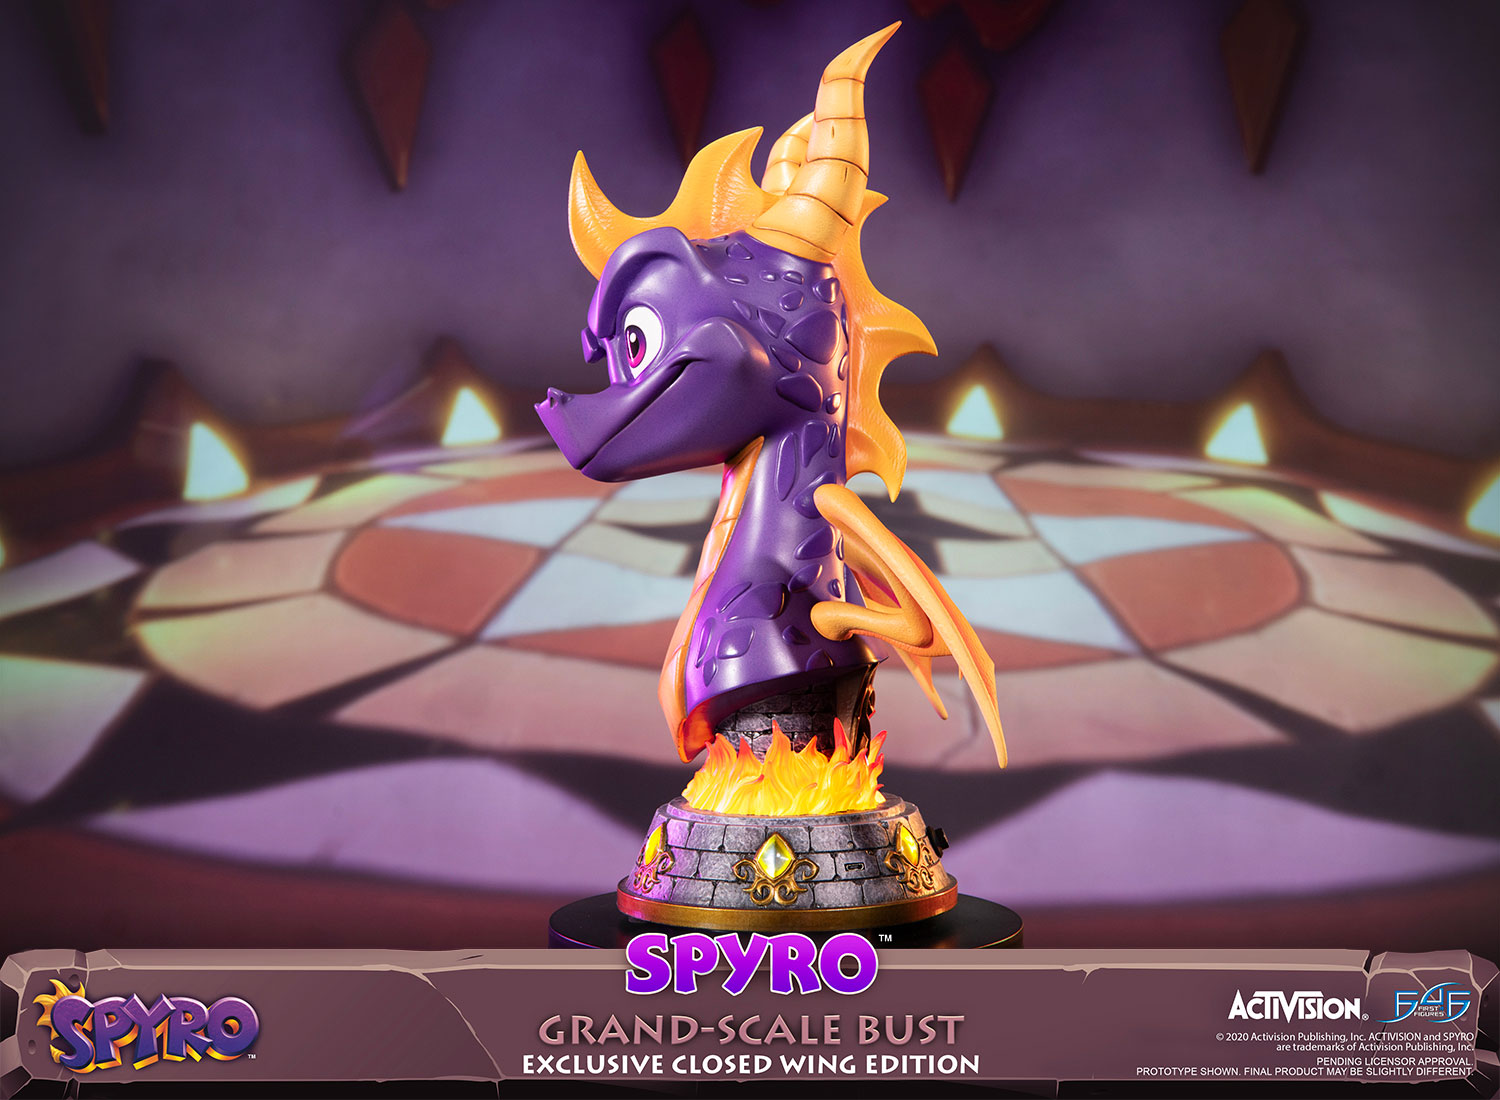 Spyro™ Grand-Scale Bust (Exclusive Closed Wing Edition)